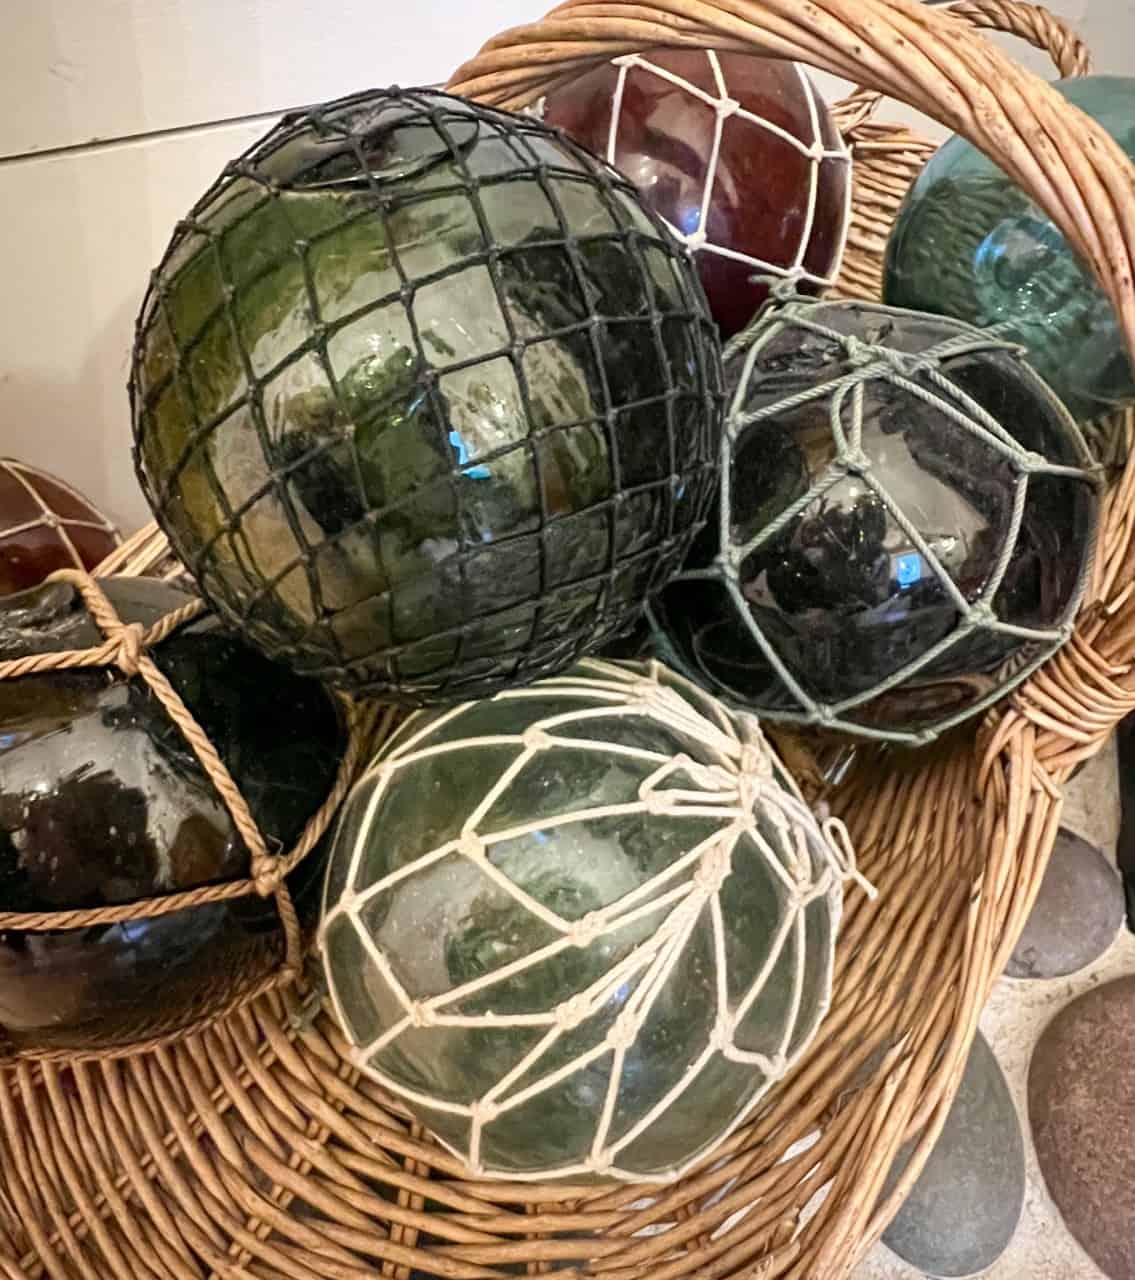 Cora Lee Rennie - Glass fishing balls used as decor in the hut